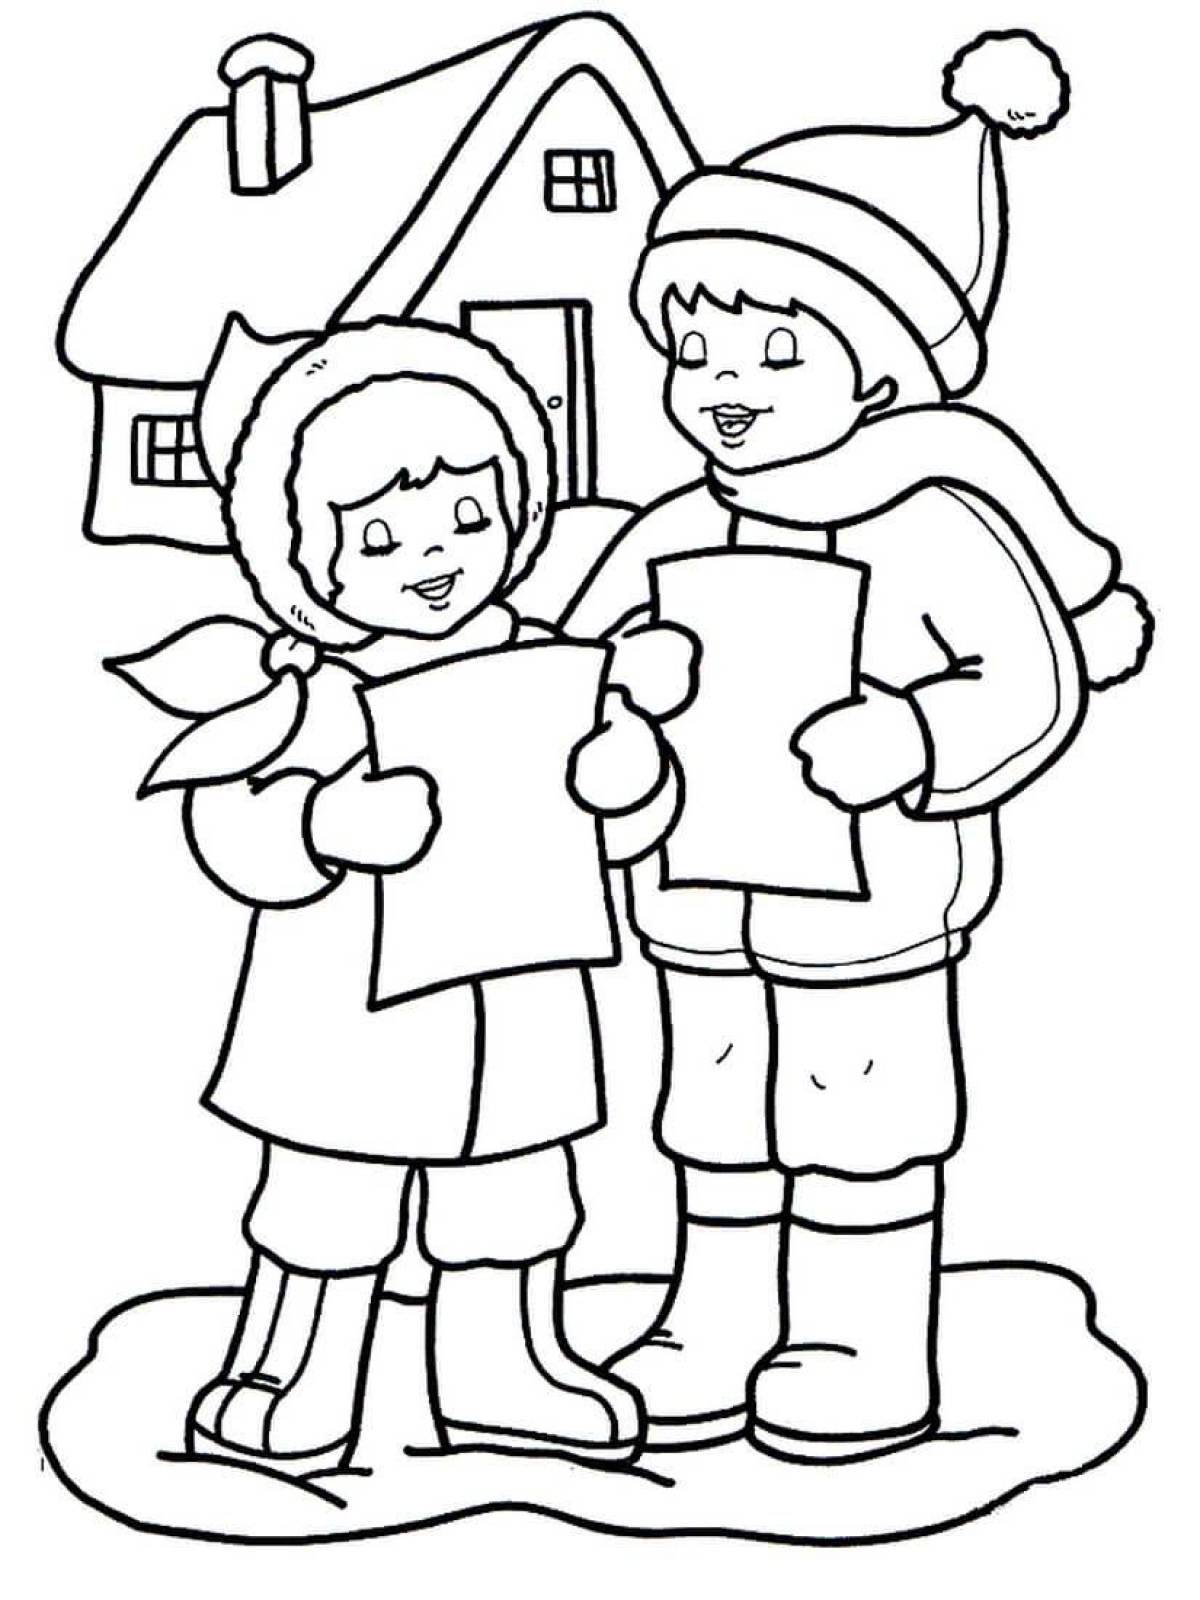 Luminous Christmas carol coloring pages for kids